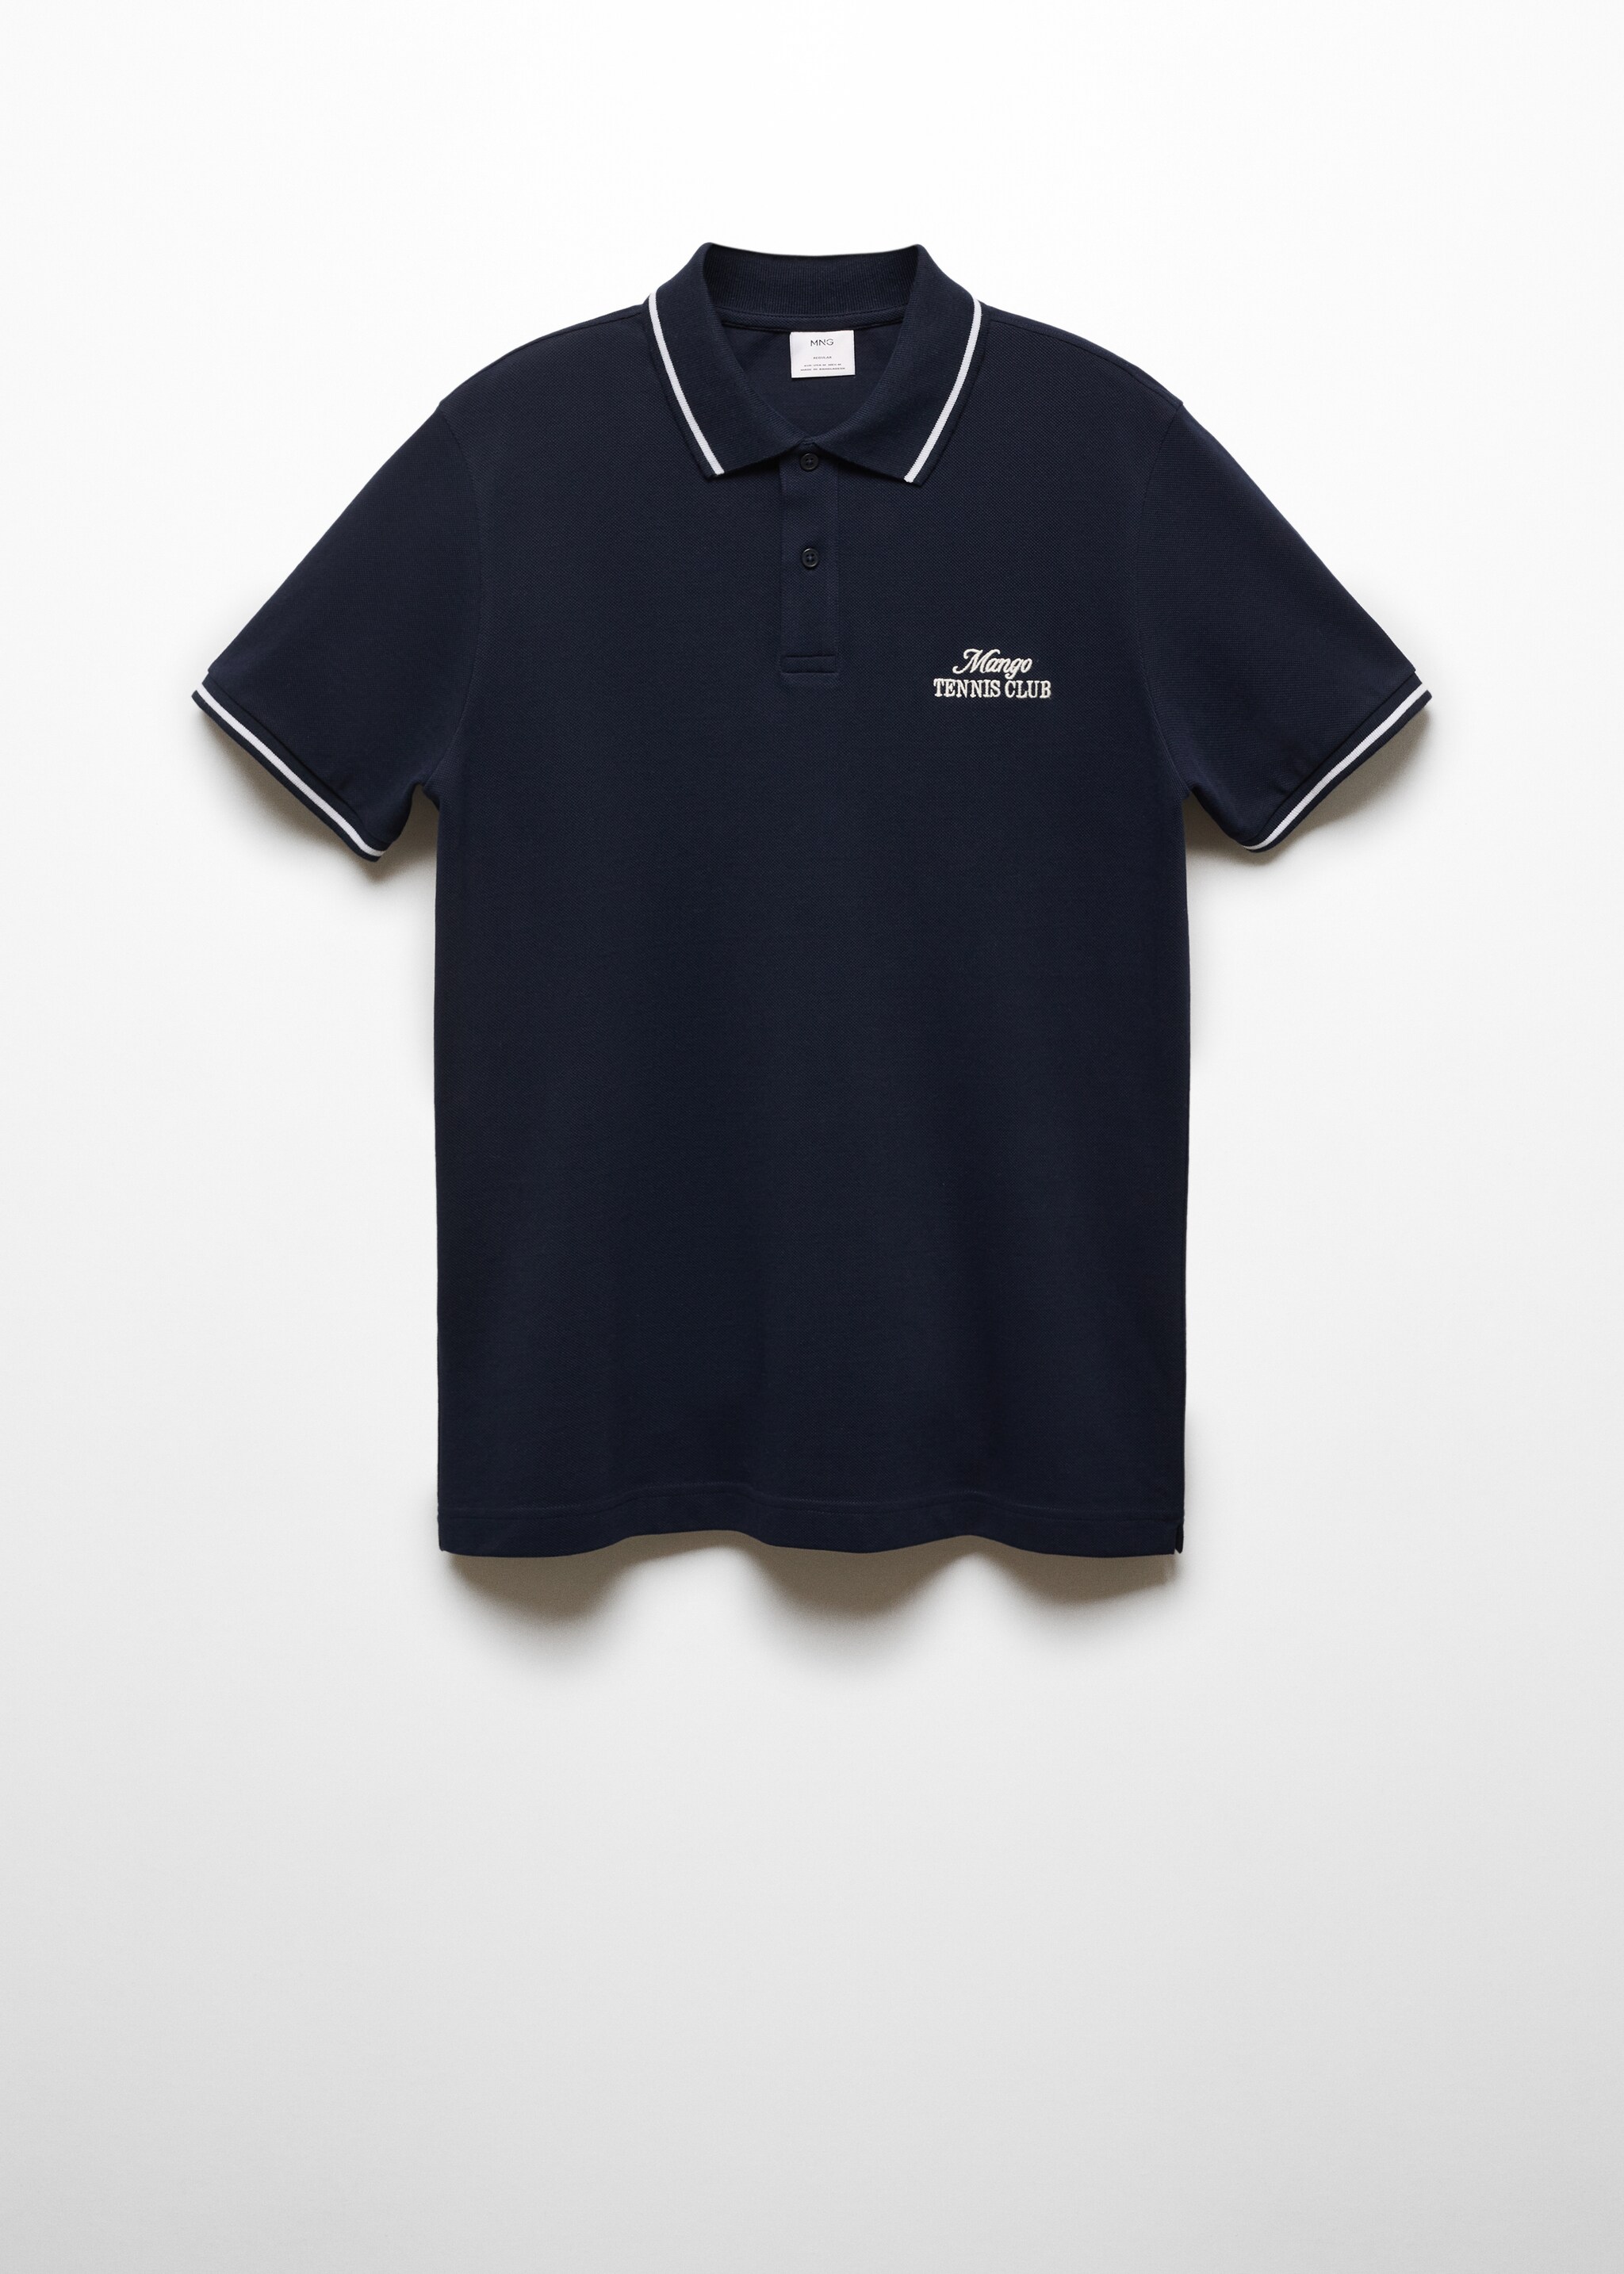 100% embroidered cotton polo shirt - Article without model